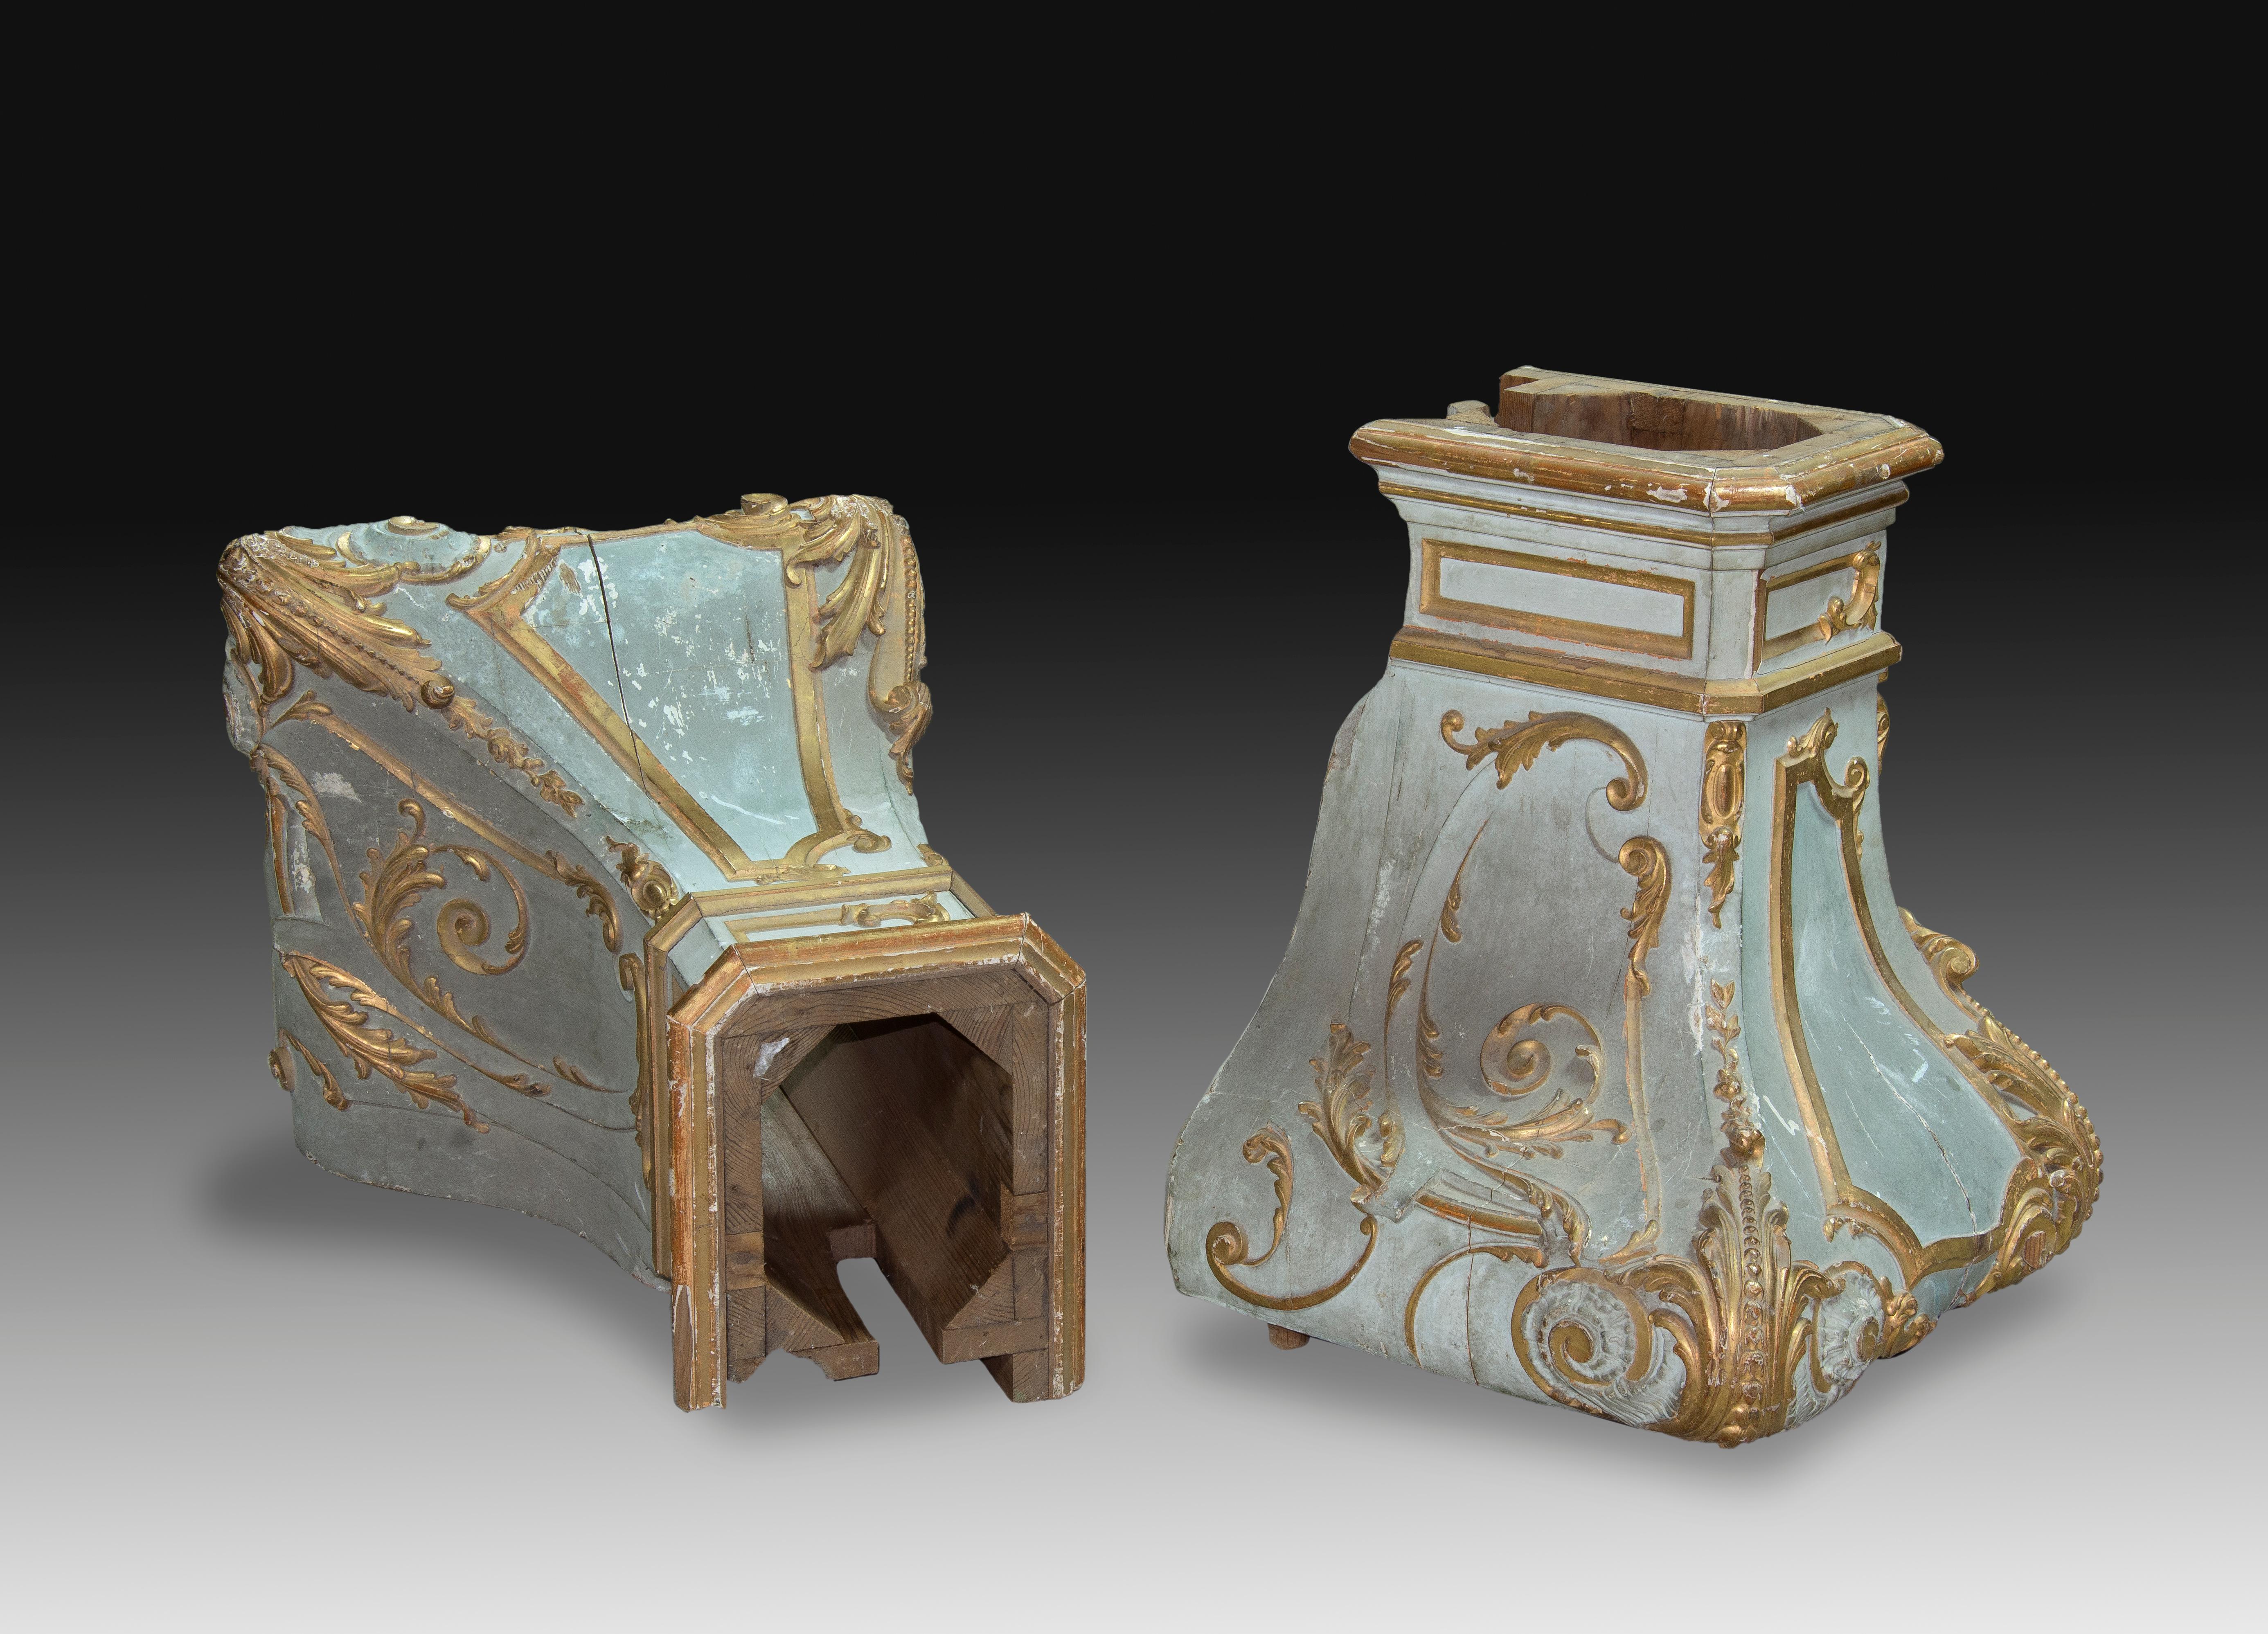 Pair of corbels. Polychrome and gilded pine wood. France, 19th century.
Pair of architectural pieces made of carved, polychrome and gilded pine wood in the shape of capitals, and have been decorated with a series of moldings and plant decorative